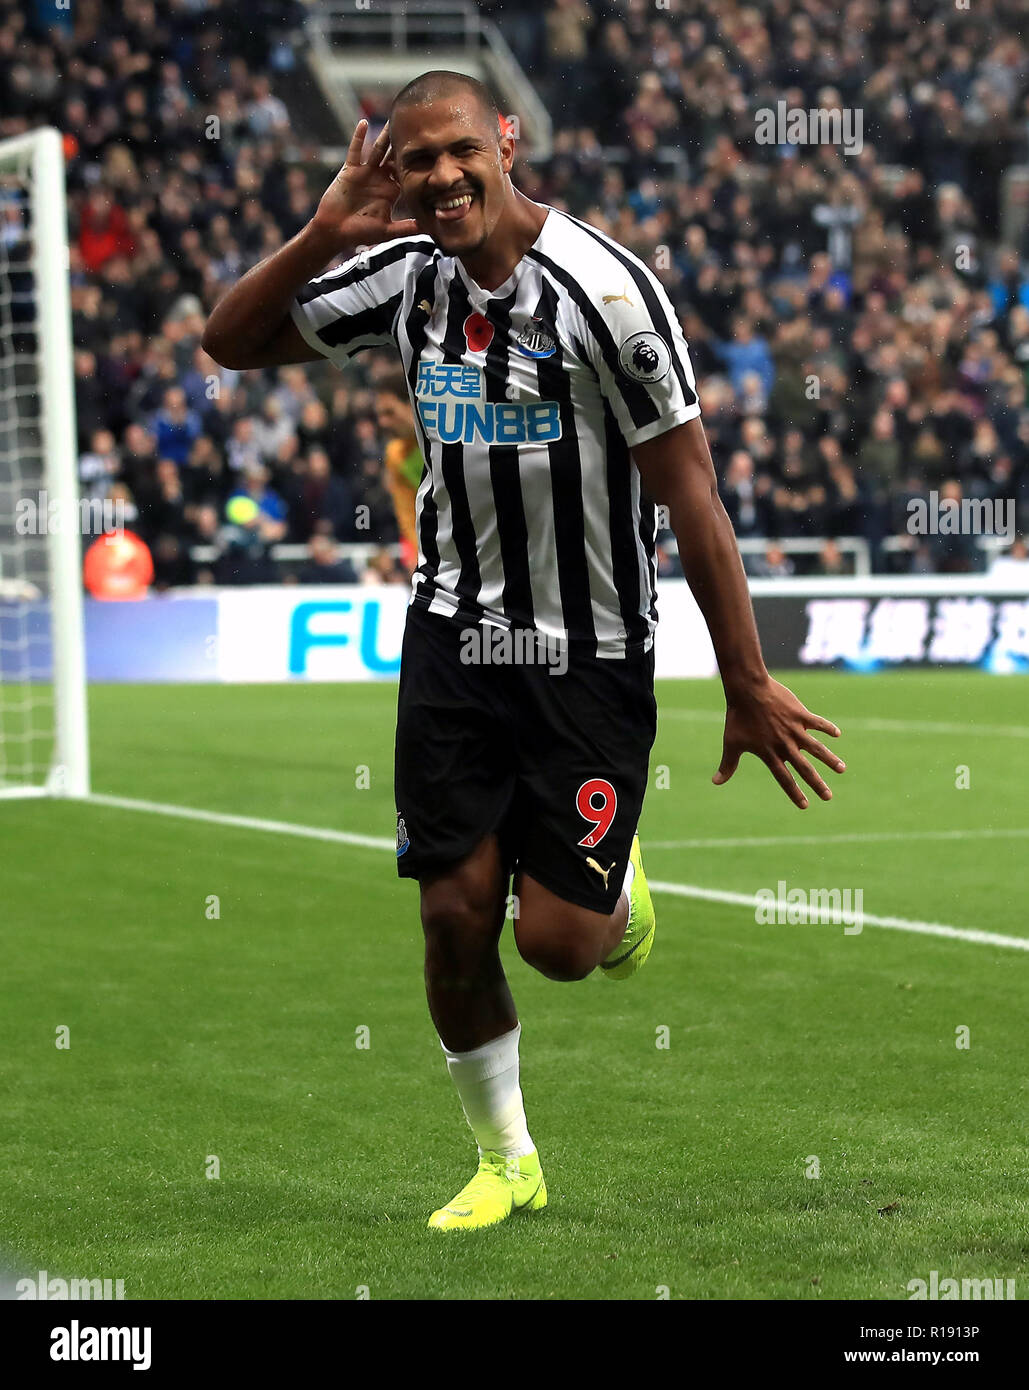 Newcastle United's Salomon Rondon celebrates scoring his side's second goal  of the game during the Premier League match at St James' Park, Newcastle  Stock Photo - Alamy